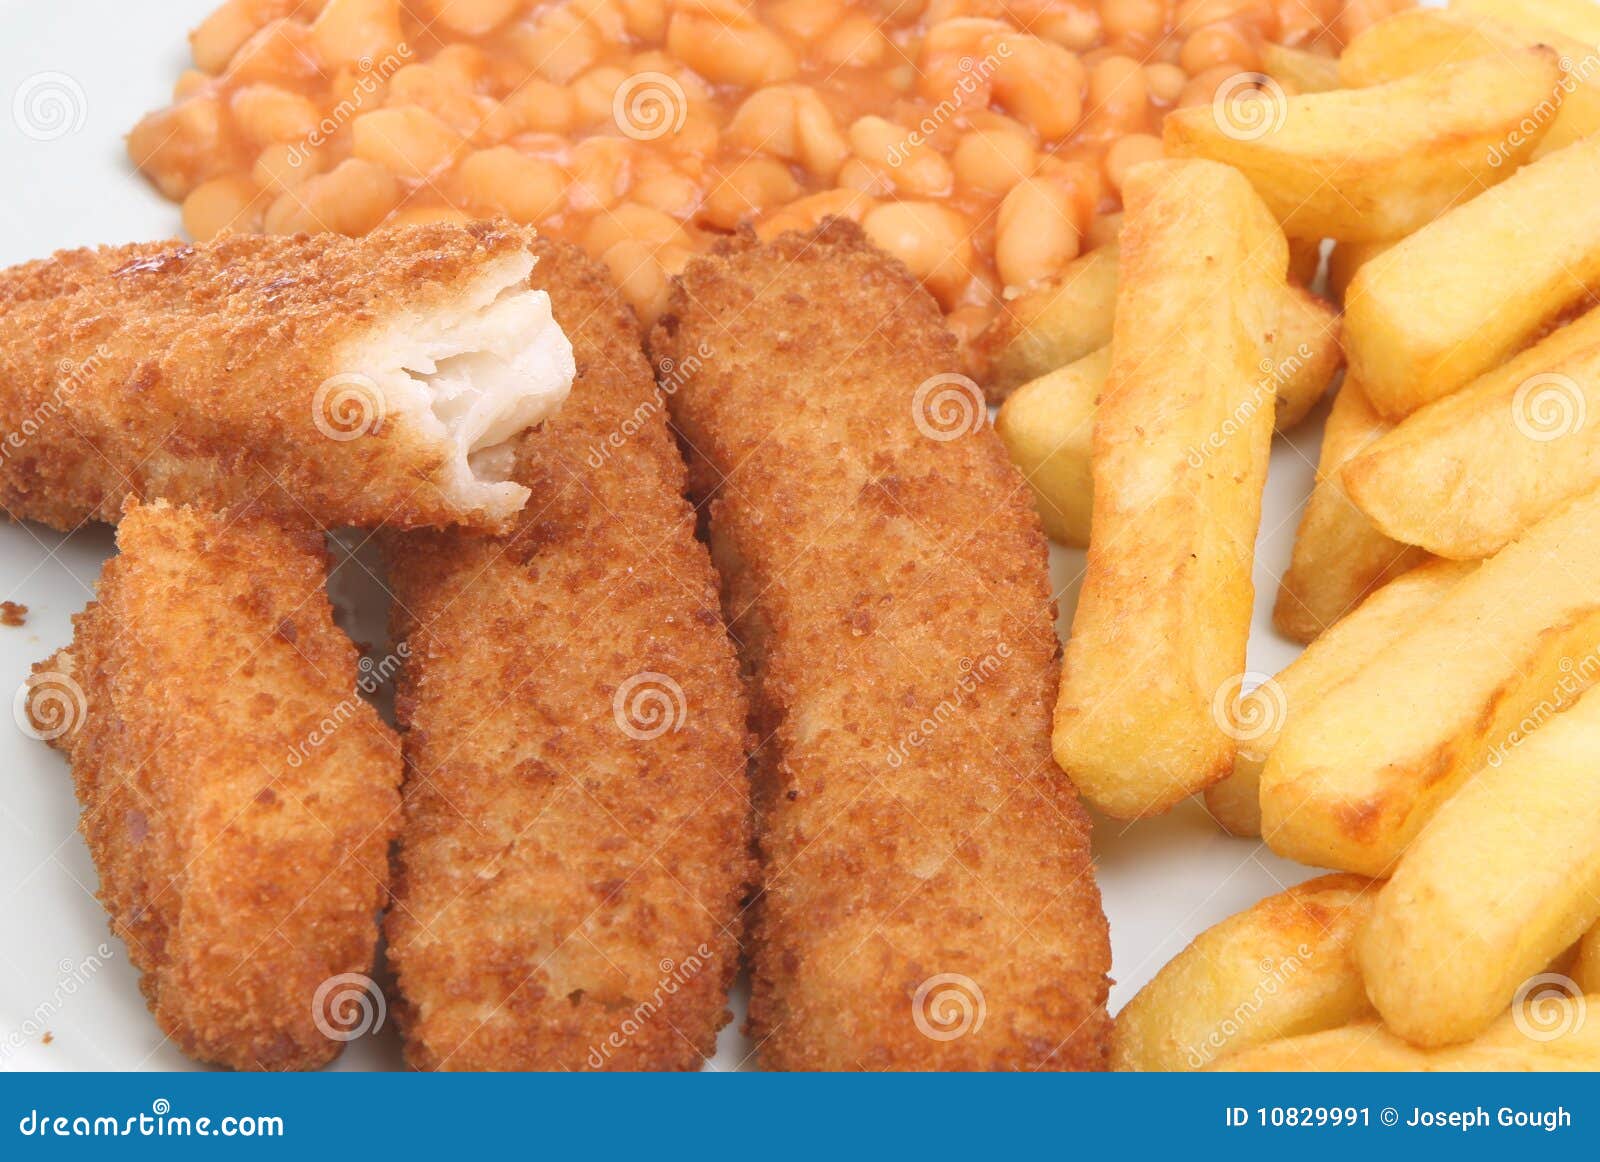 Fish Fingers & Chips stock image. Image of chip, breadcrumbs - 10829991